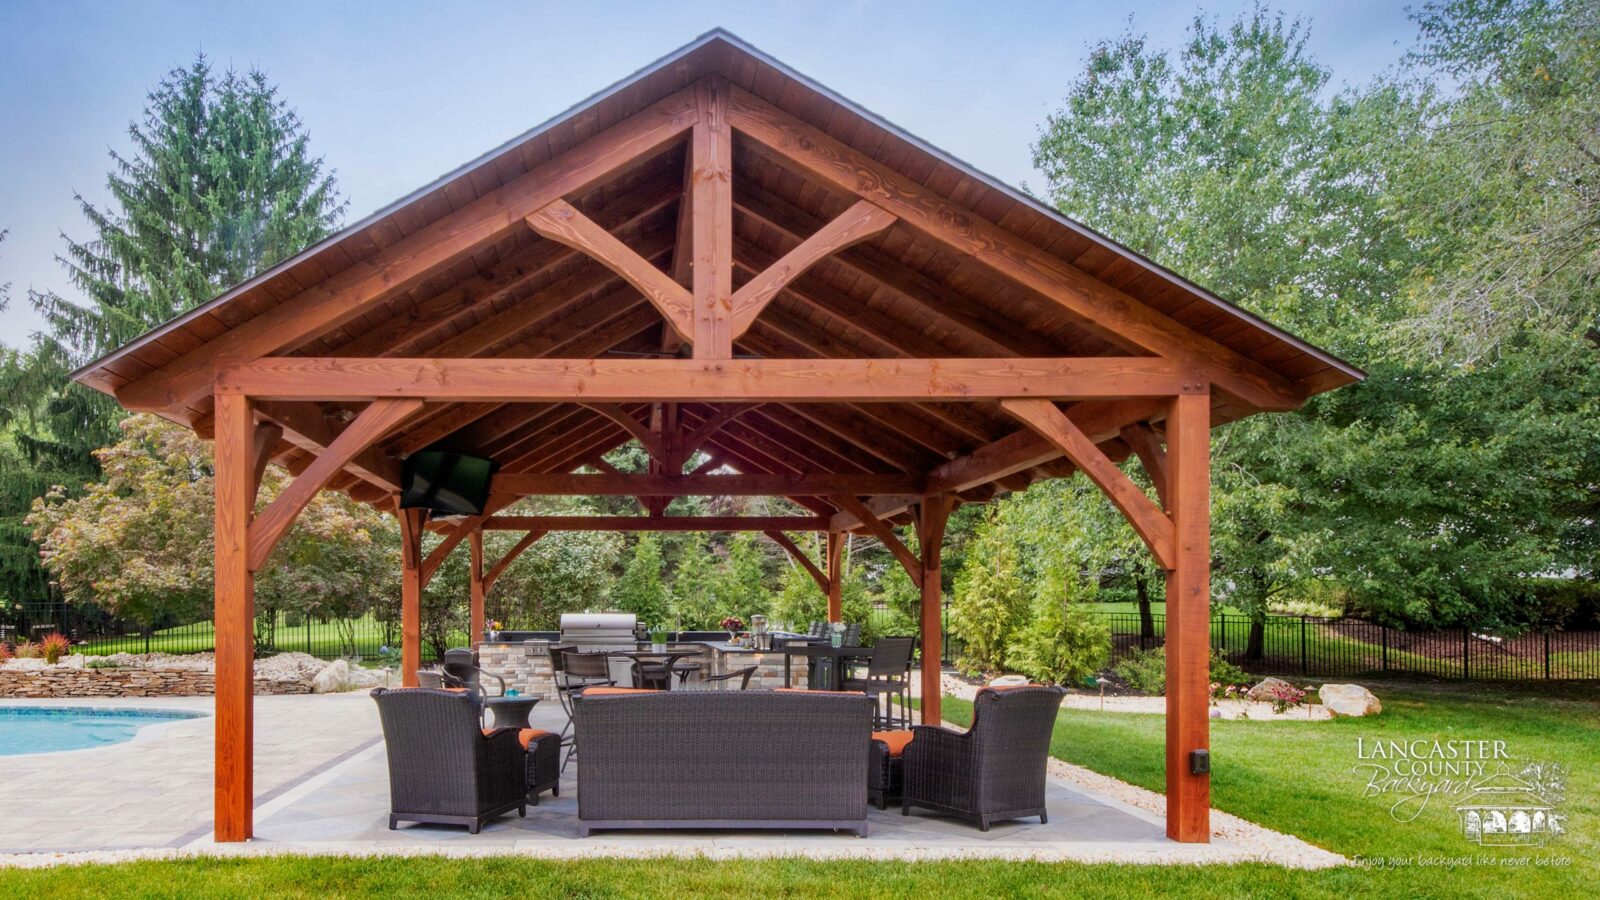 20x40 tim & heather o'connell timber frame pavilion